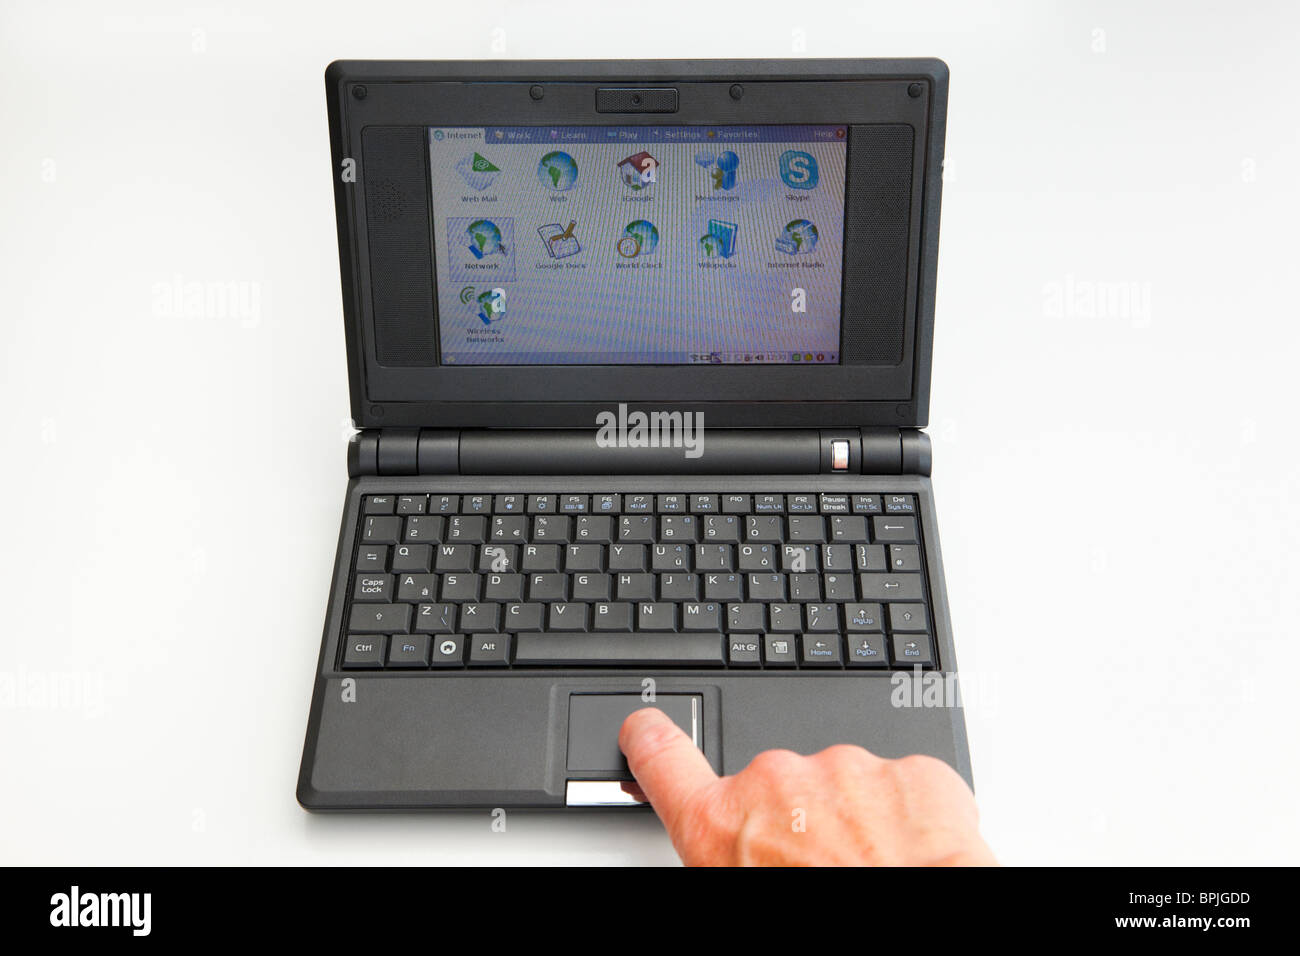 UK, Britain. Person's hand using a small Asus netbook EEE PC netbook computer running Linux operating system Stock Photo